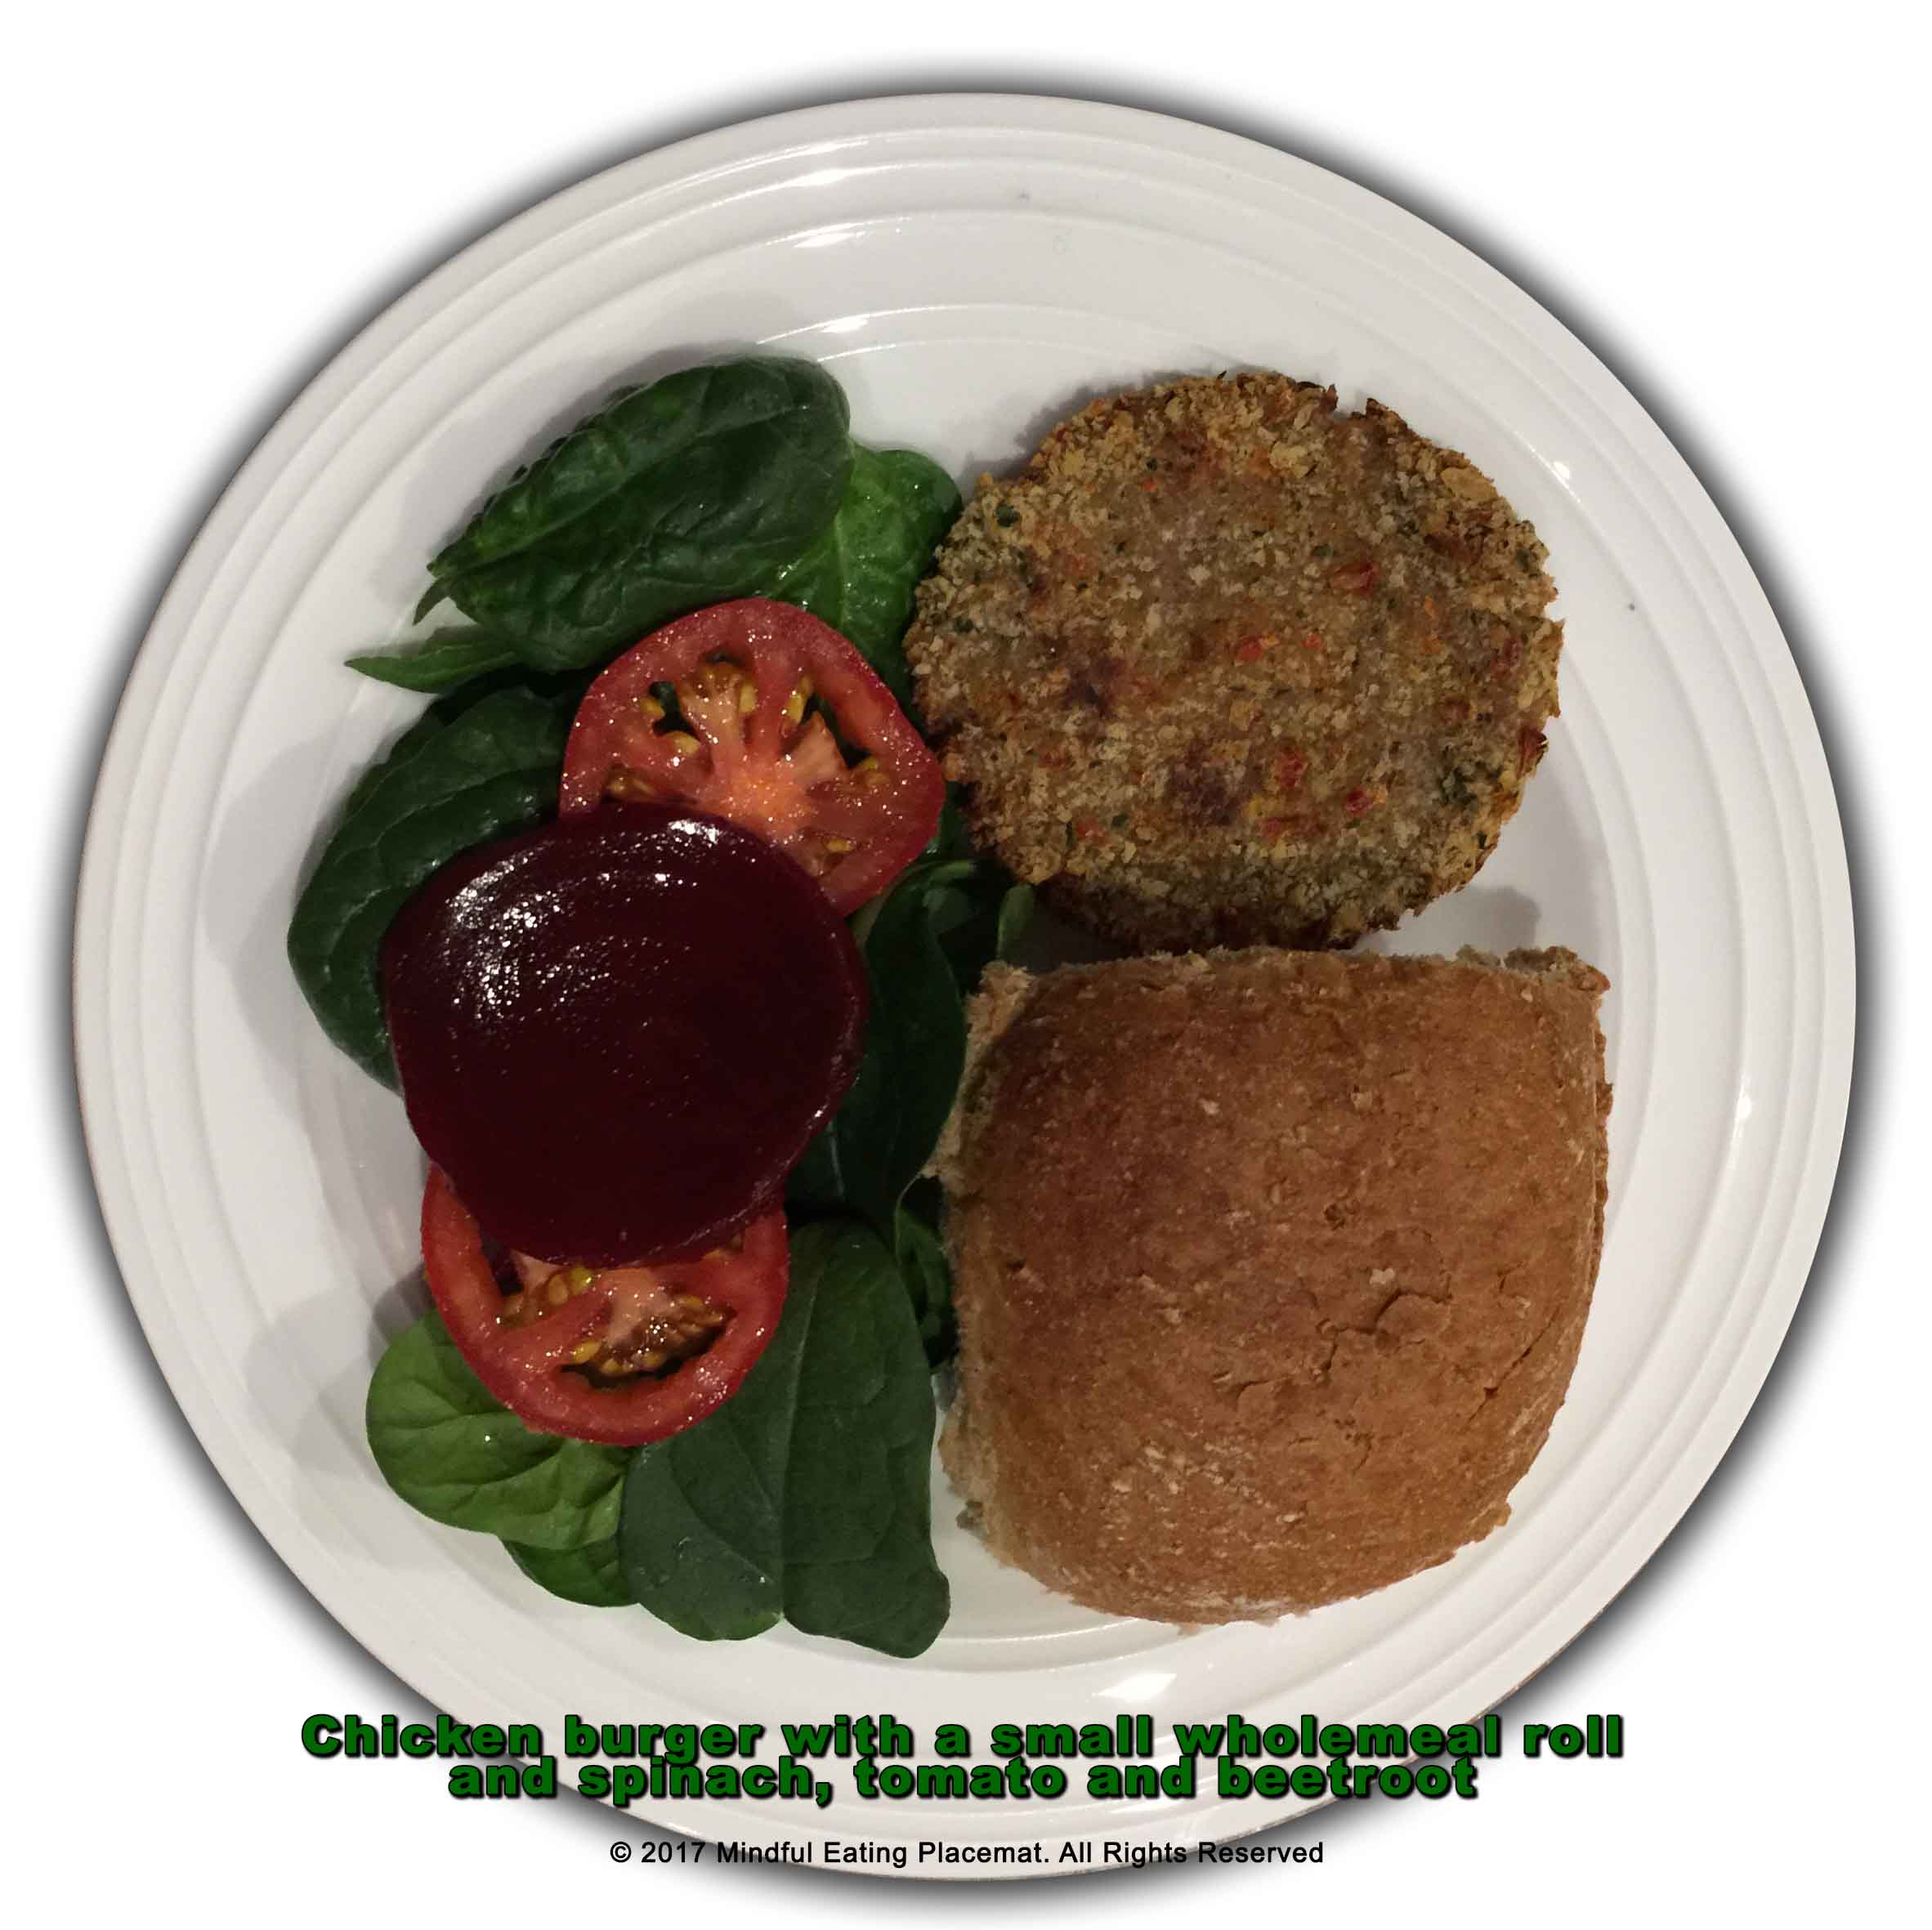 Chicken burger with wholemeal roll and spinach, tomato and beetroot